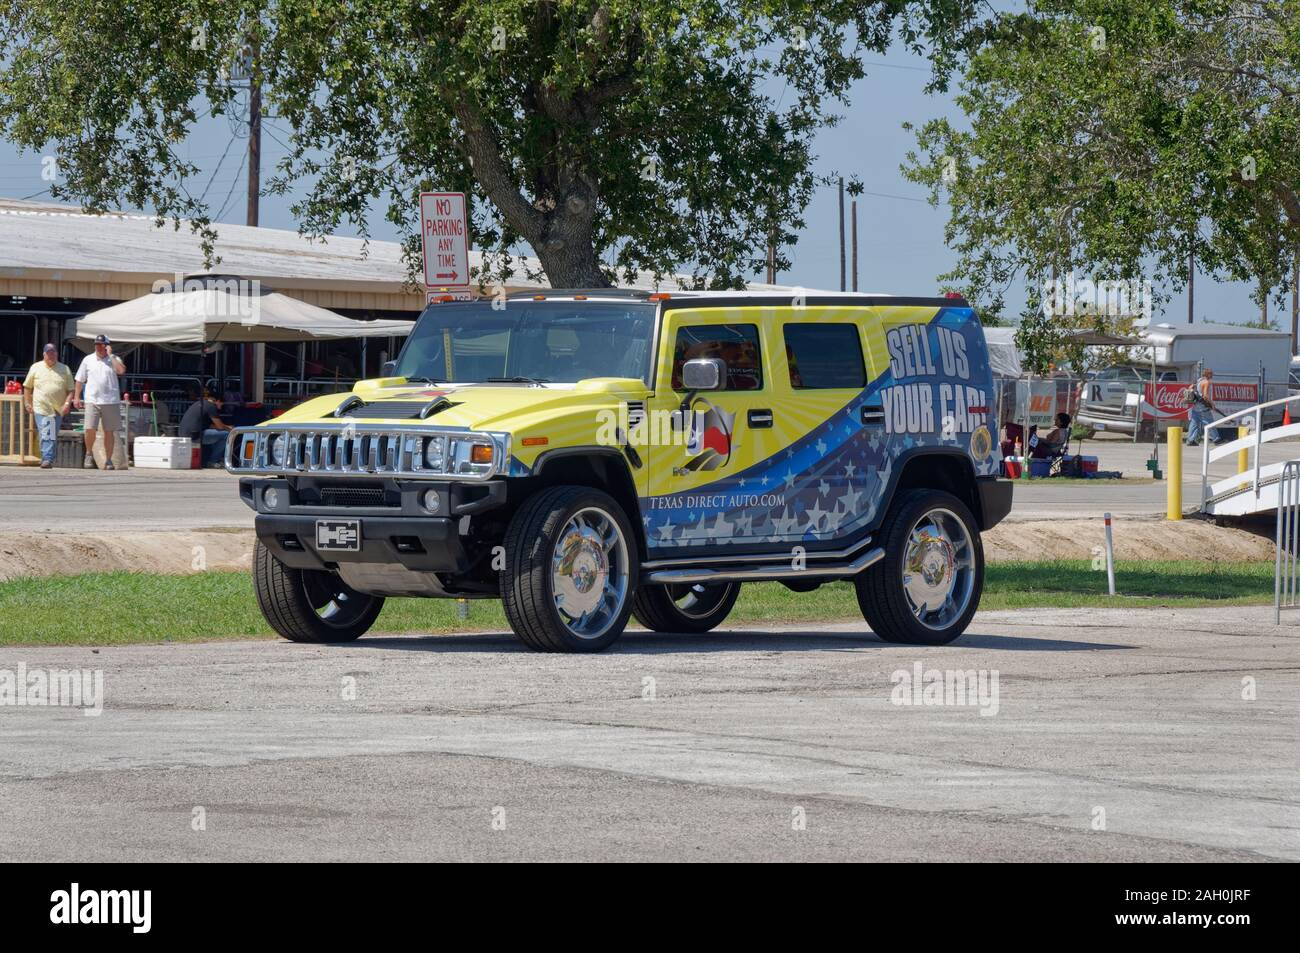 A Hummer H2 SUV with Texas Direct Auto advertising color scheme painted on it parked in a lot at the entrance into the Event. Stock Photo